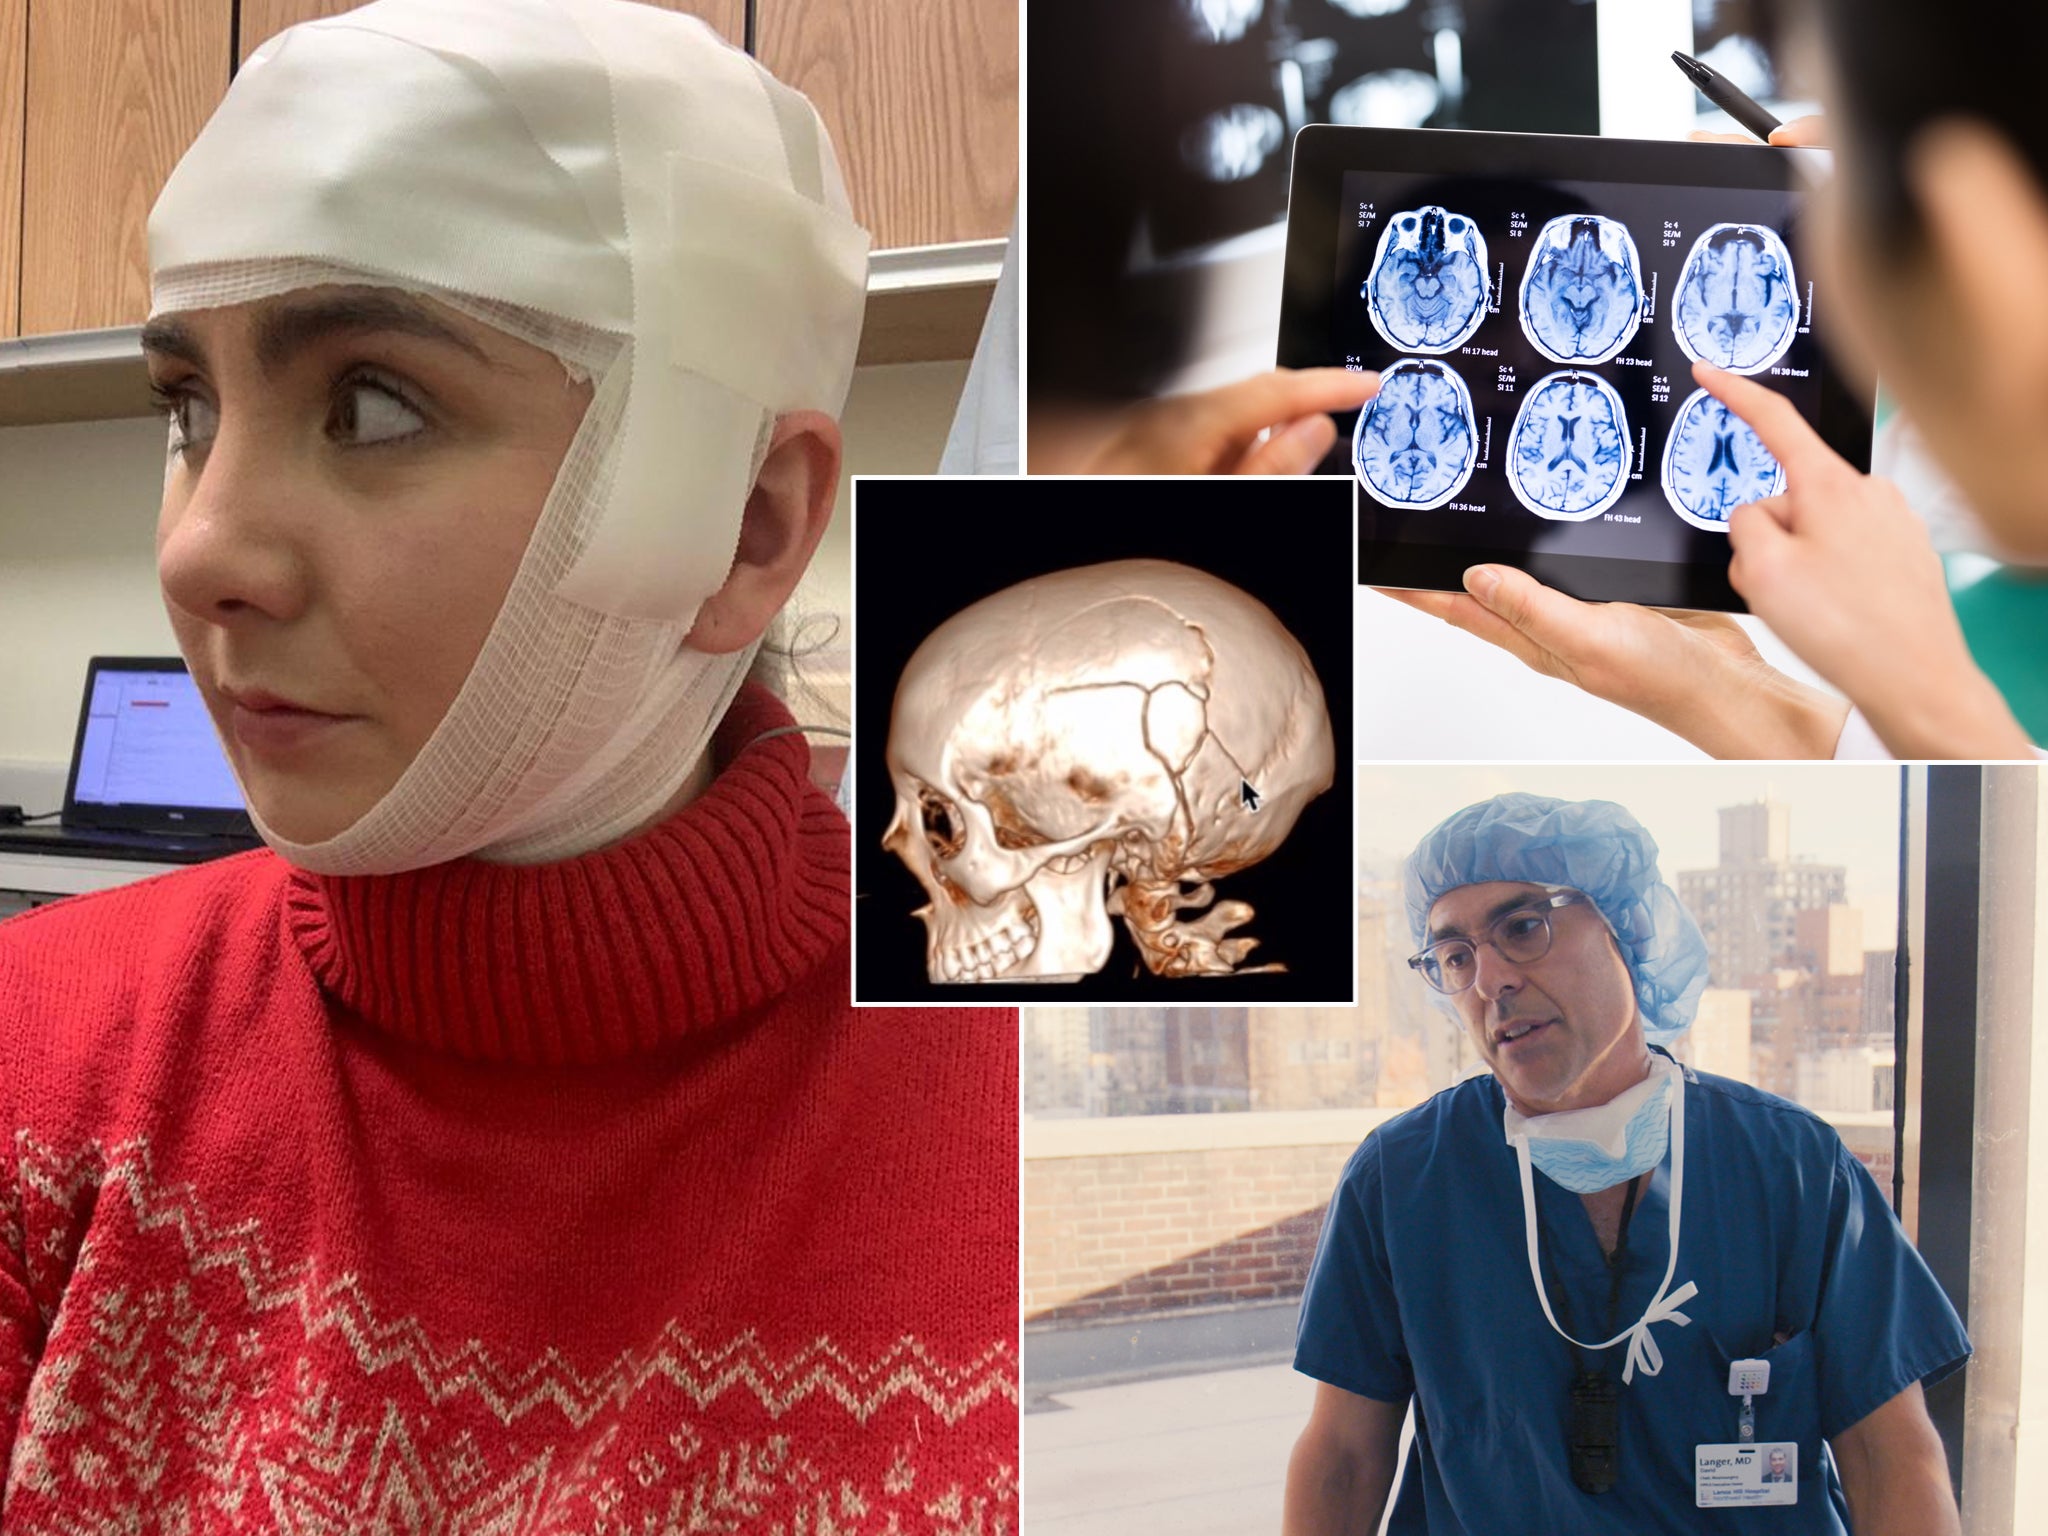 Lucy Gray at hospital (left), Lucy’s skull scan (centre), Dr David Langer, chair of neurosurgery at Lenox Hill hospital (bottom right), stock brain scan (top right)